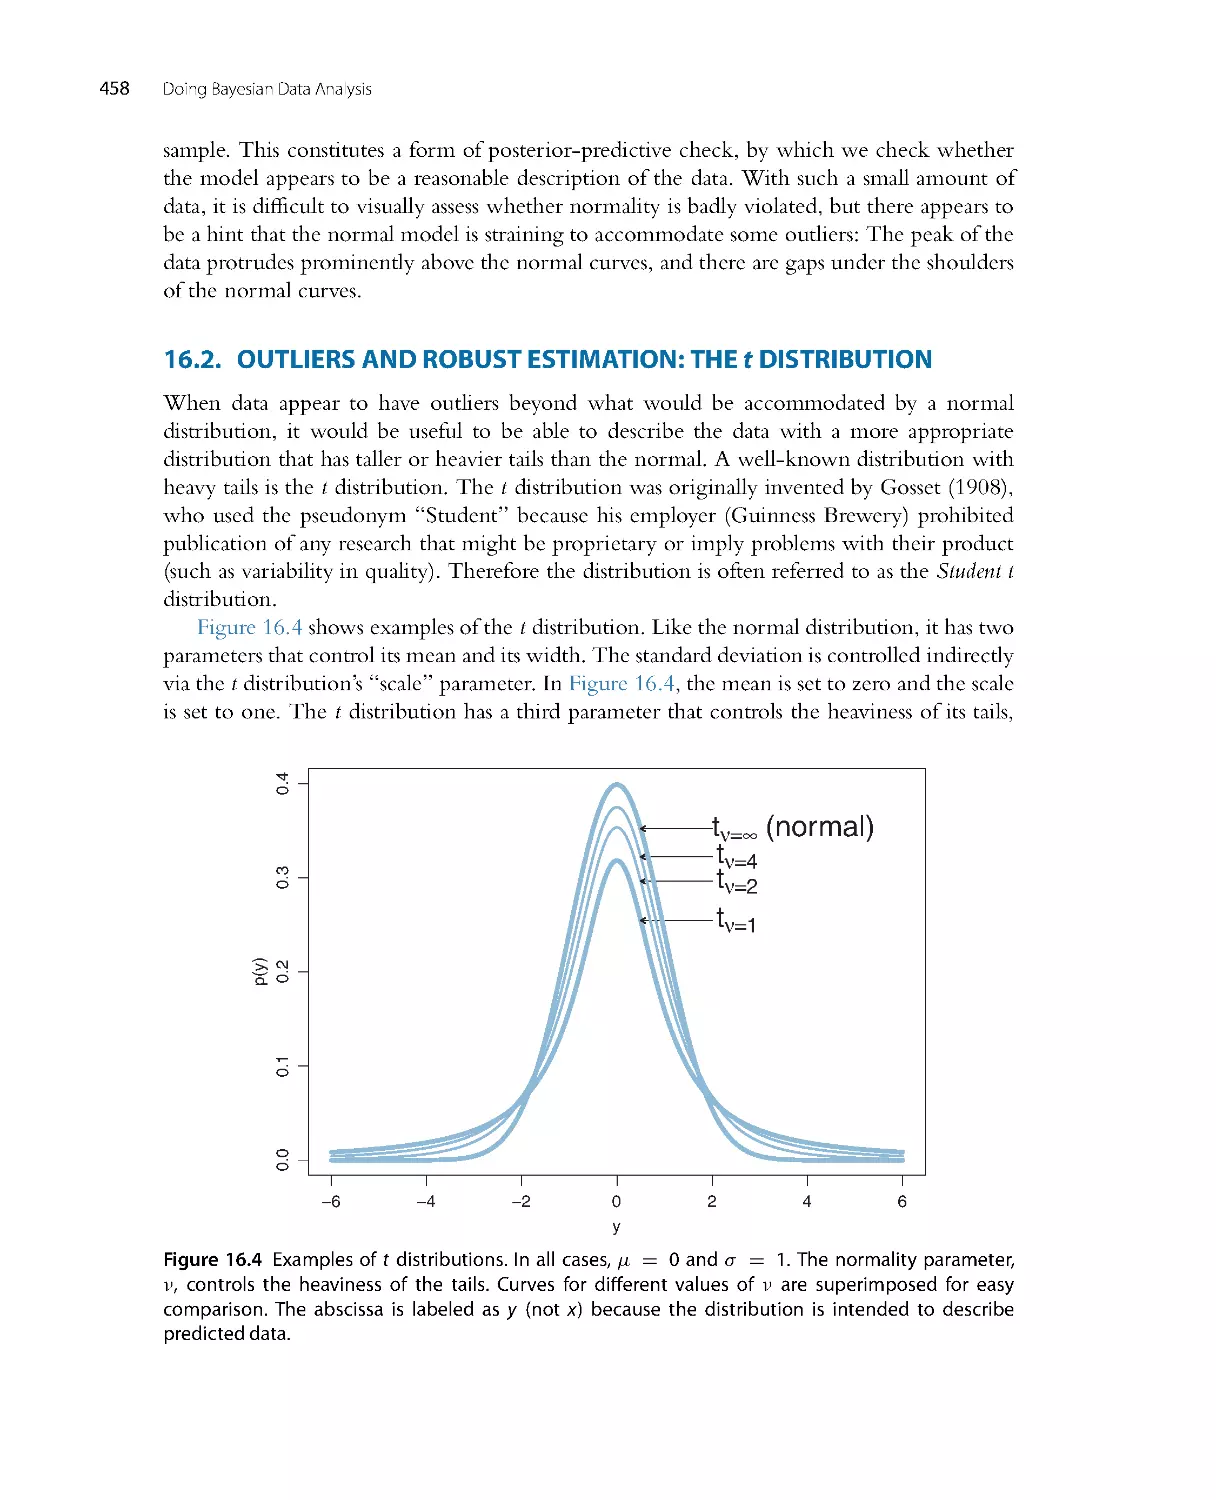 Outliers and Robust Estimation: The t Distribution